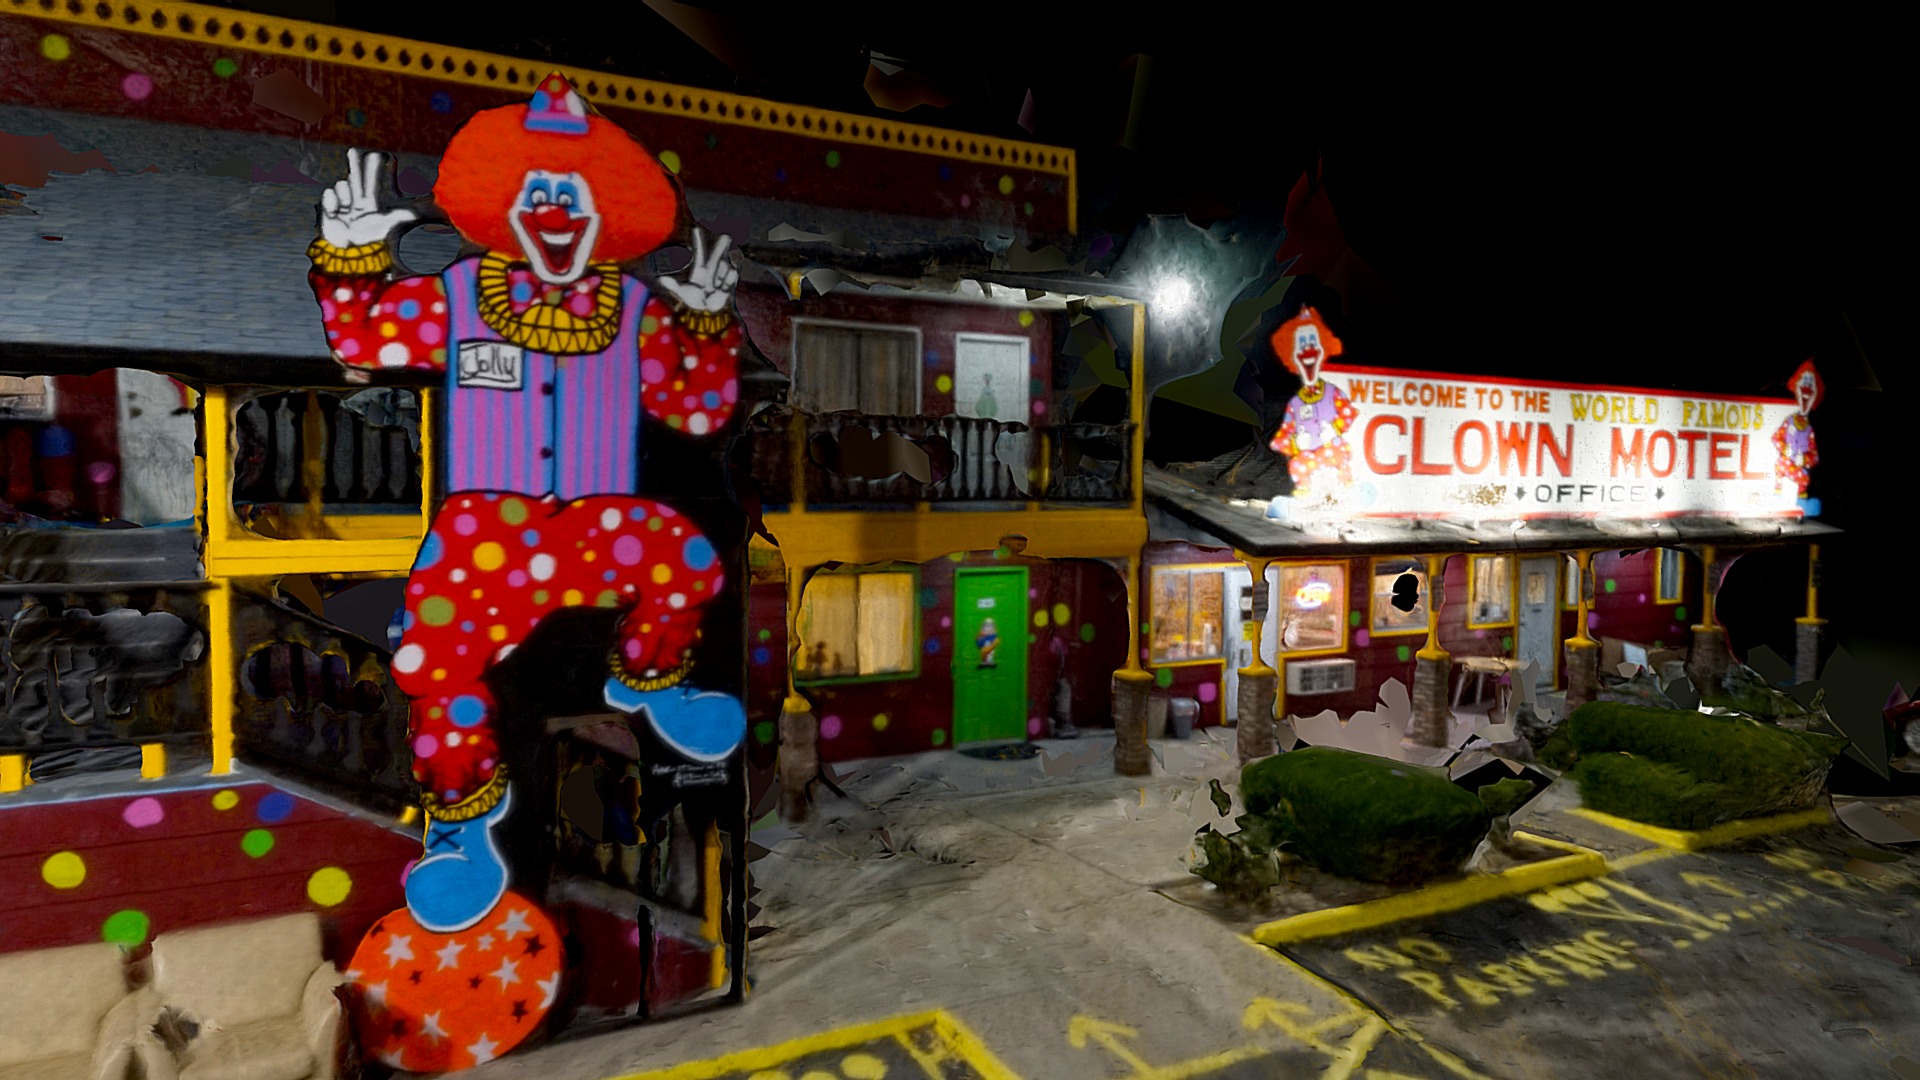 3D model Clown Motel, Tonopah Nevada - This is a 3D model of the Clown Motel, Tonopah Nevada. The 3D model is about a colorful building with a sign.